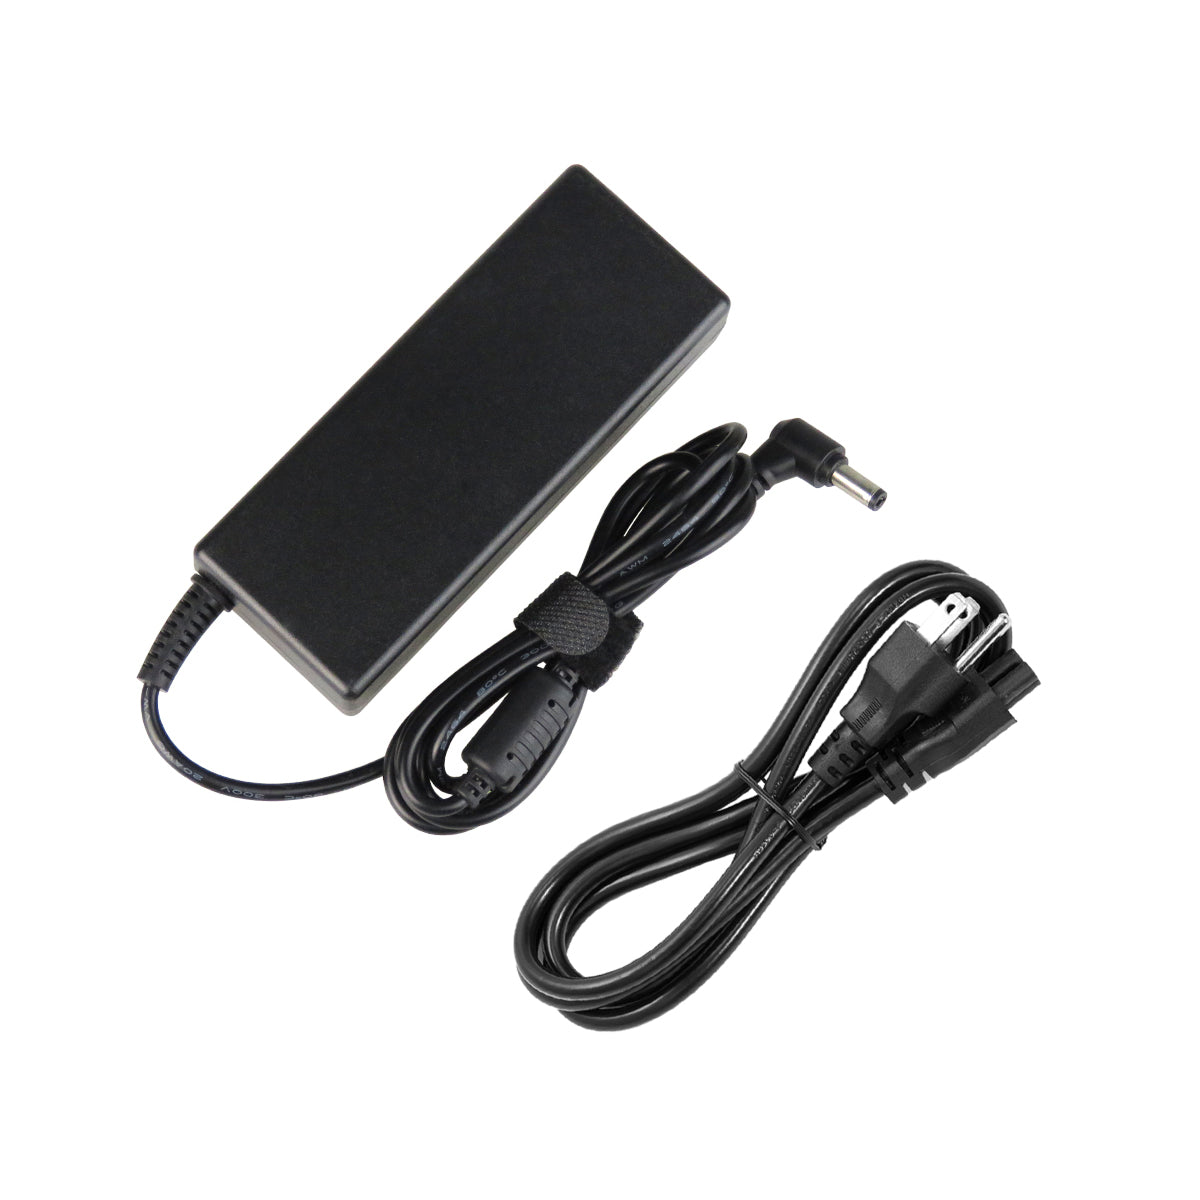 AC Adapter Charger for ASUS X56VA Notebook.